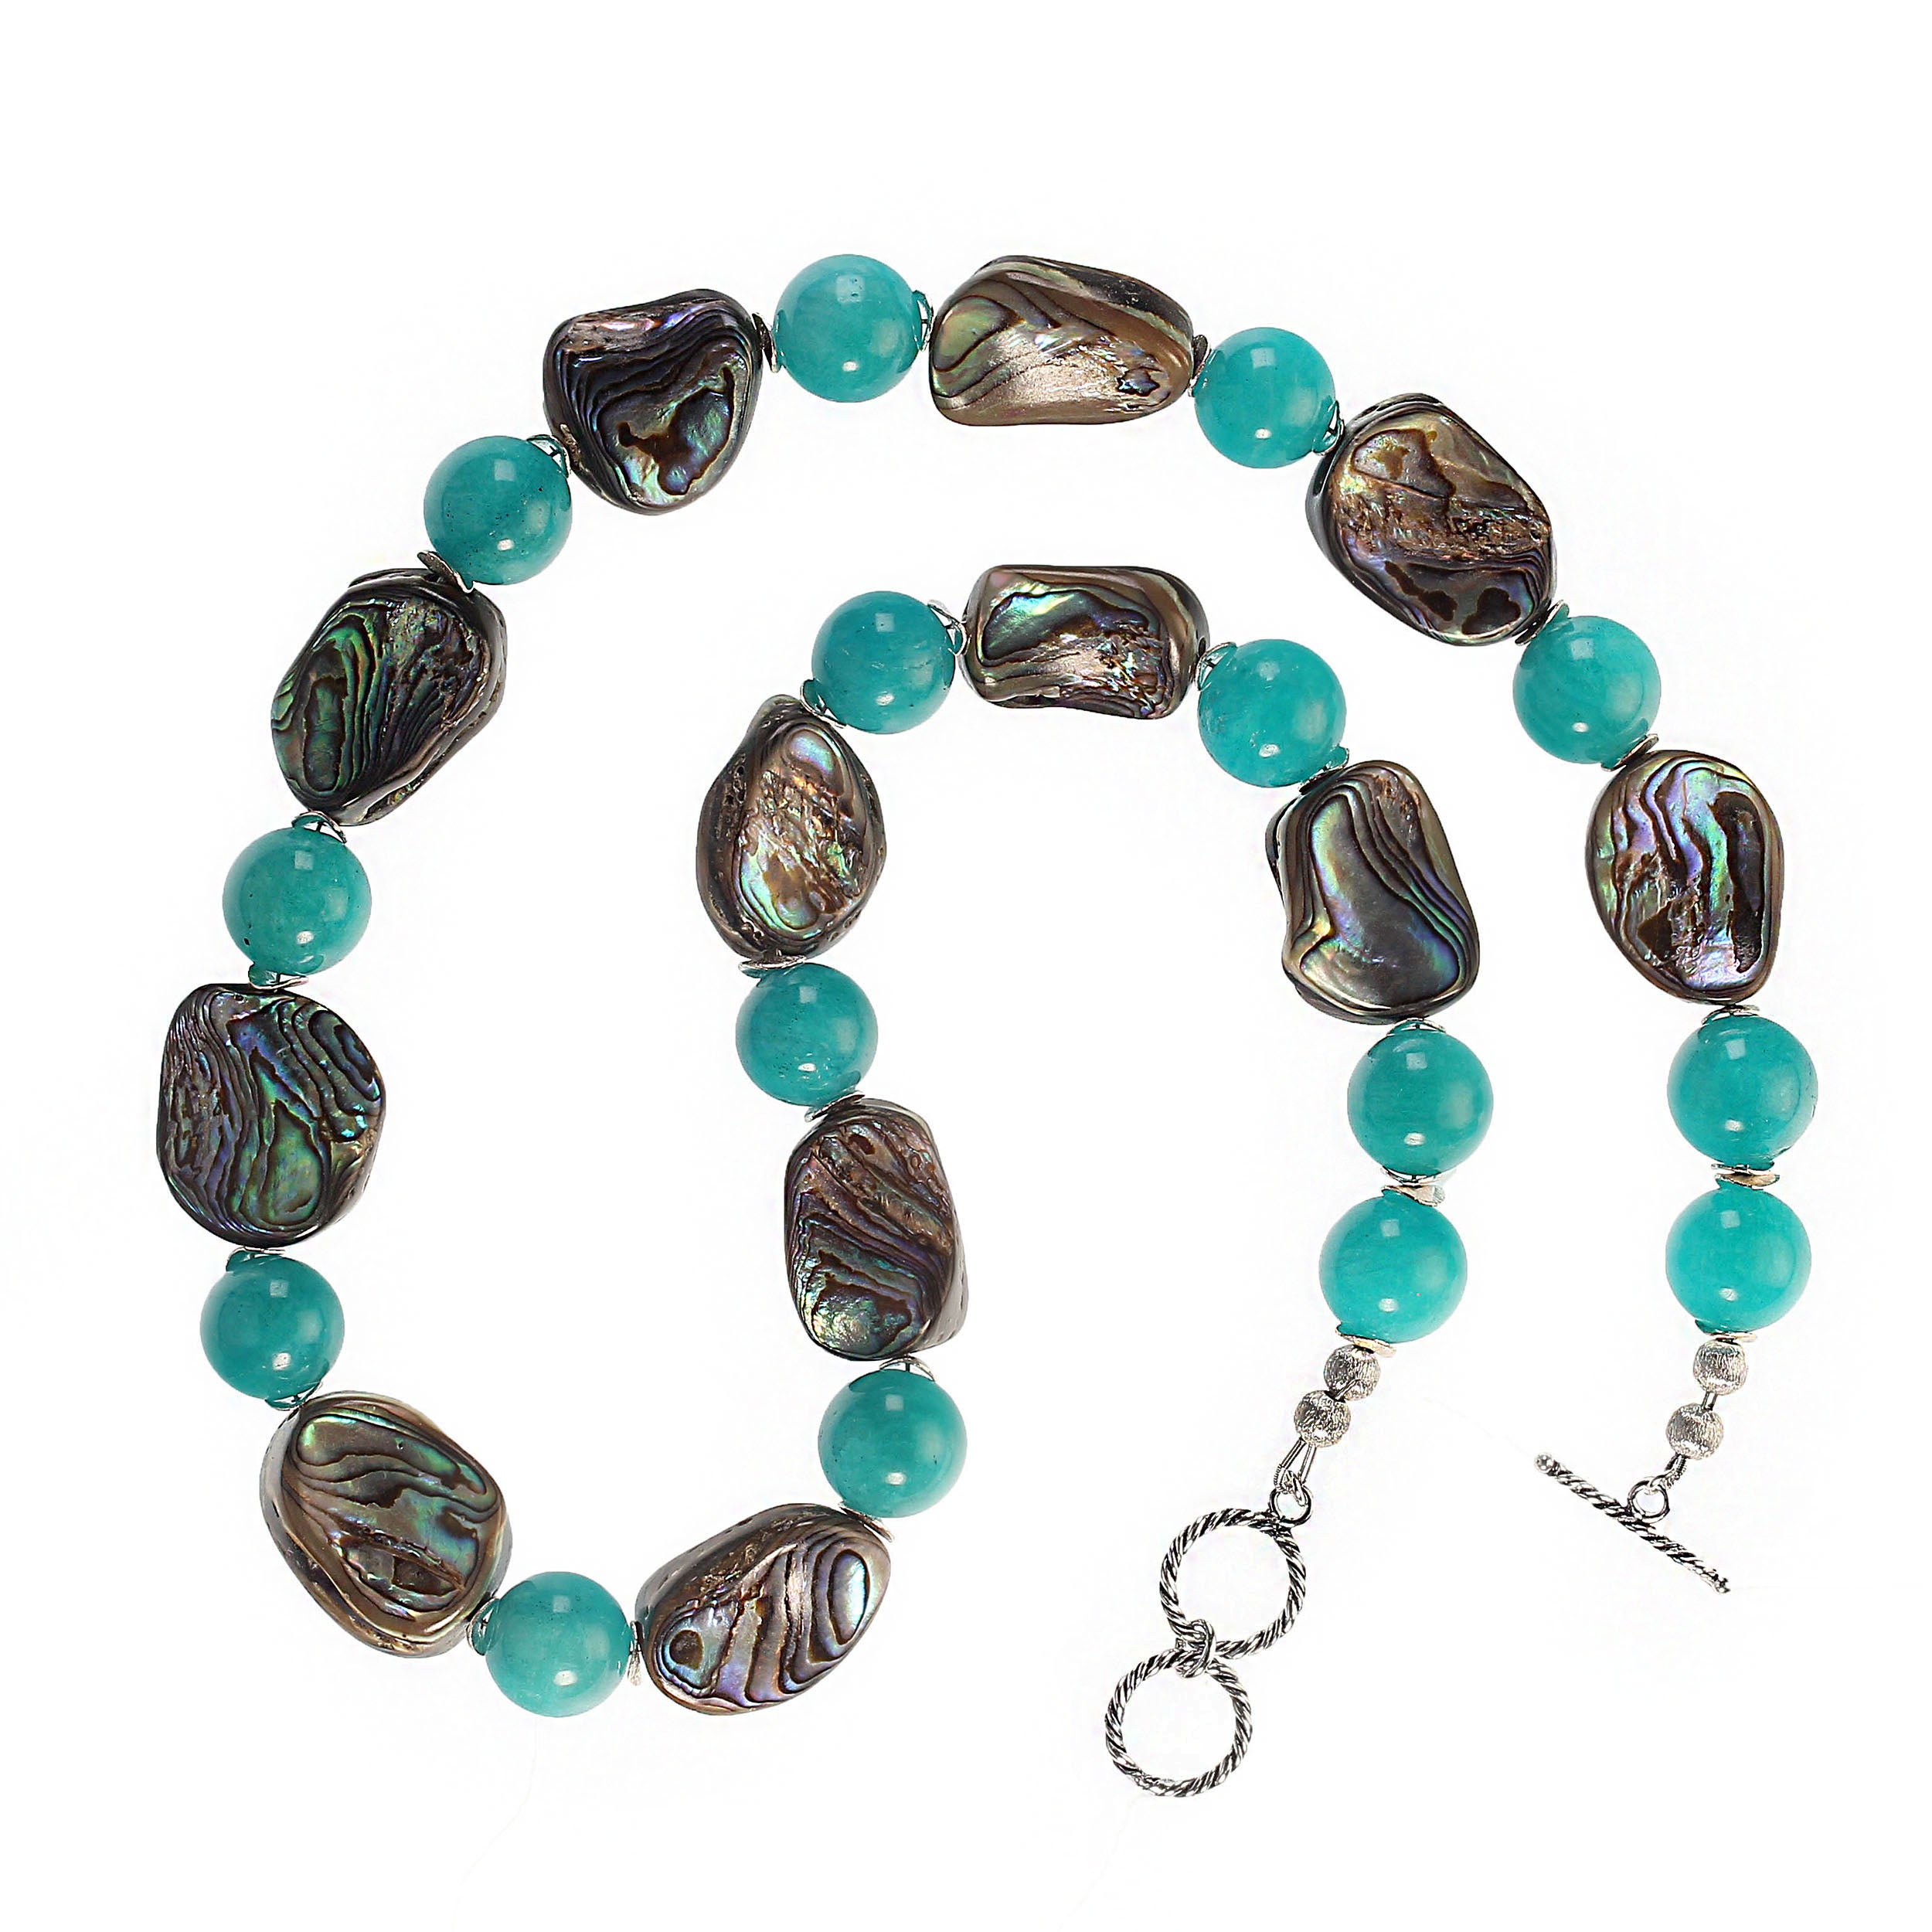 23-Inch Iridescent double-sided abalone and reconstituted amazonite necklace.  This perfect Spring necklace is a lovely turquoisy blue-green and iridescent blue/green/purple. Silver tone flutters accent both the abalone and the amazonite.  The